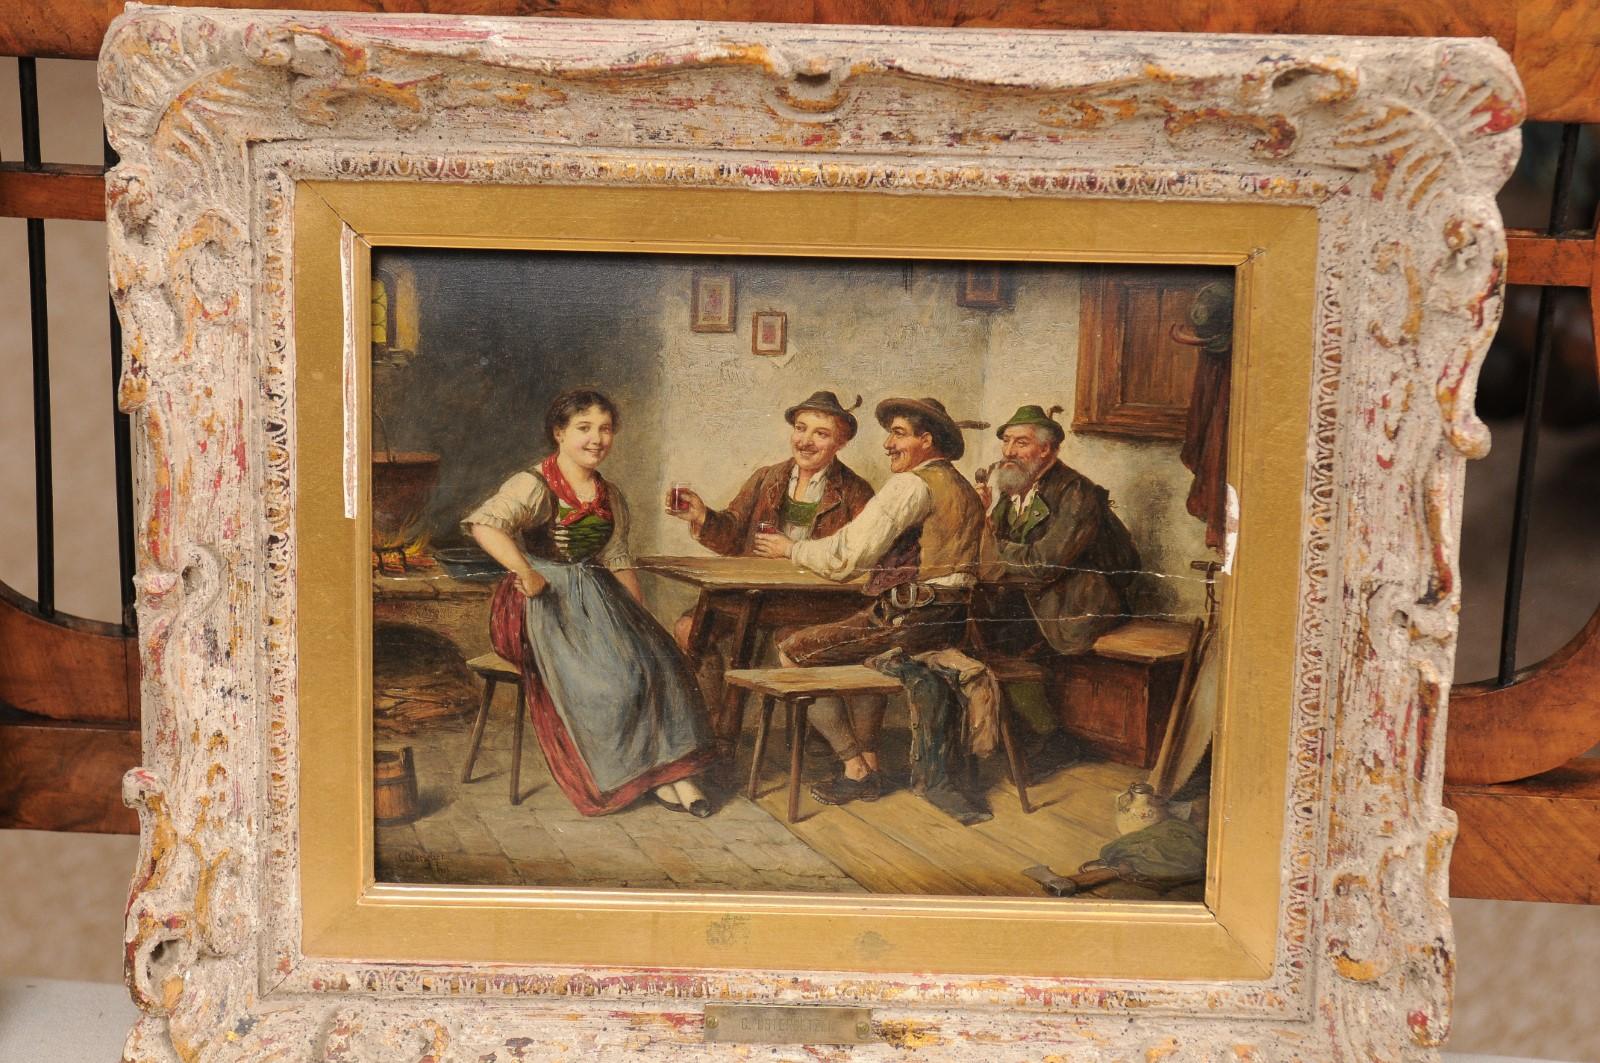 Pair of Oil Paintings of Tavern Scenes, Signed & Dated “C. Ostersetzer, 1903